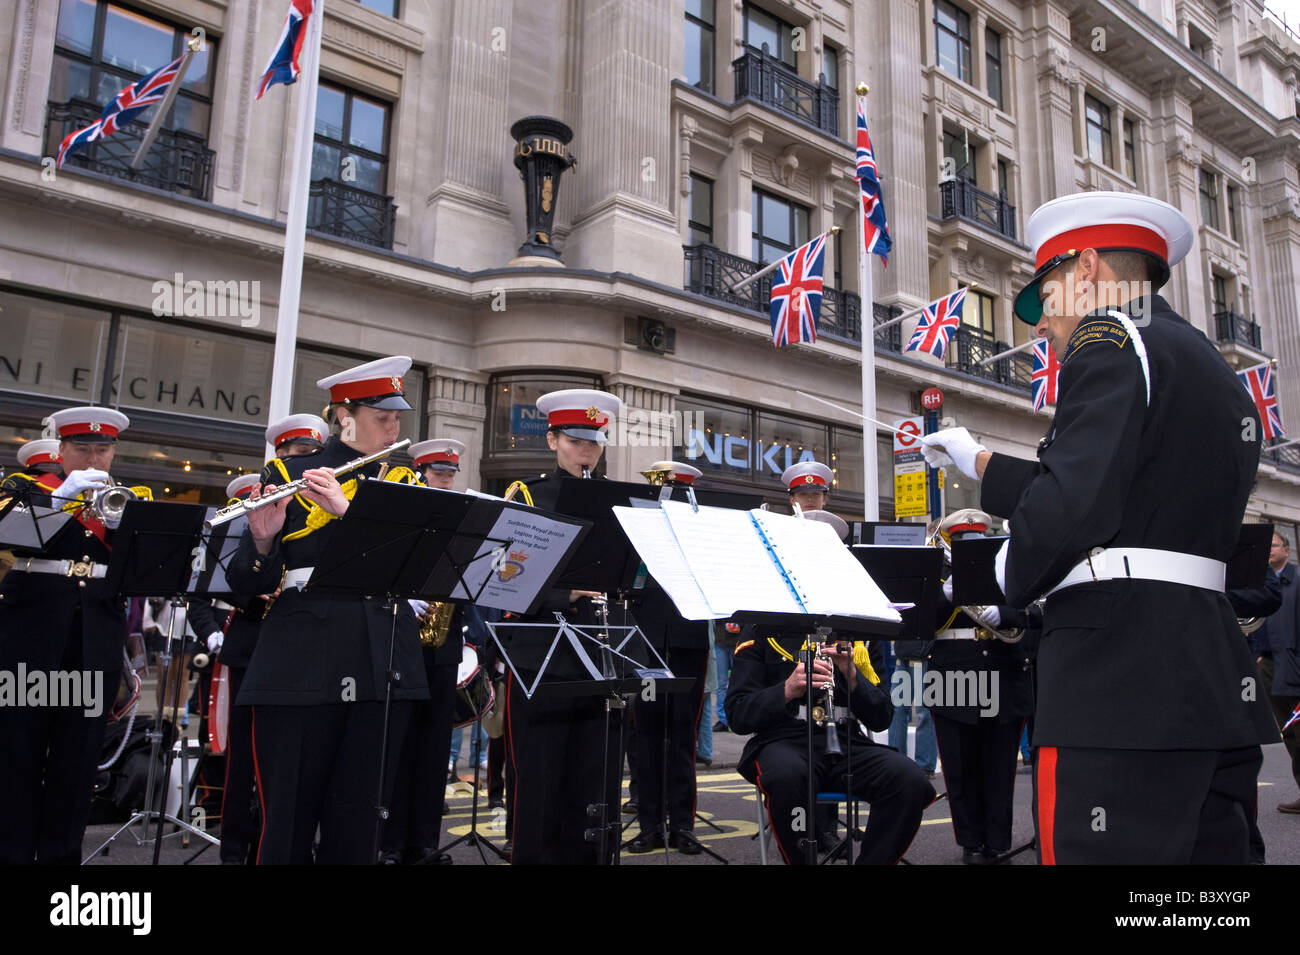 Brass band performing during Regent Street Festival London W1 United Kingdom Stock Photo